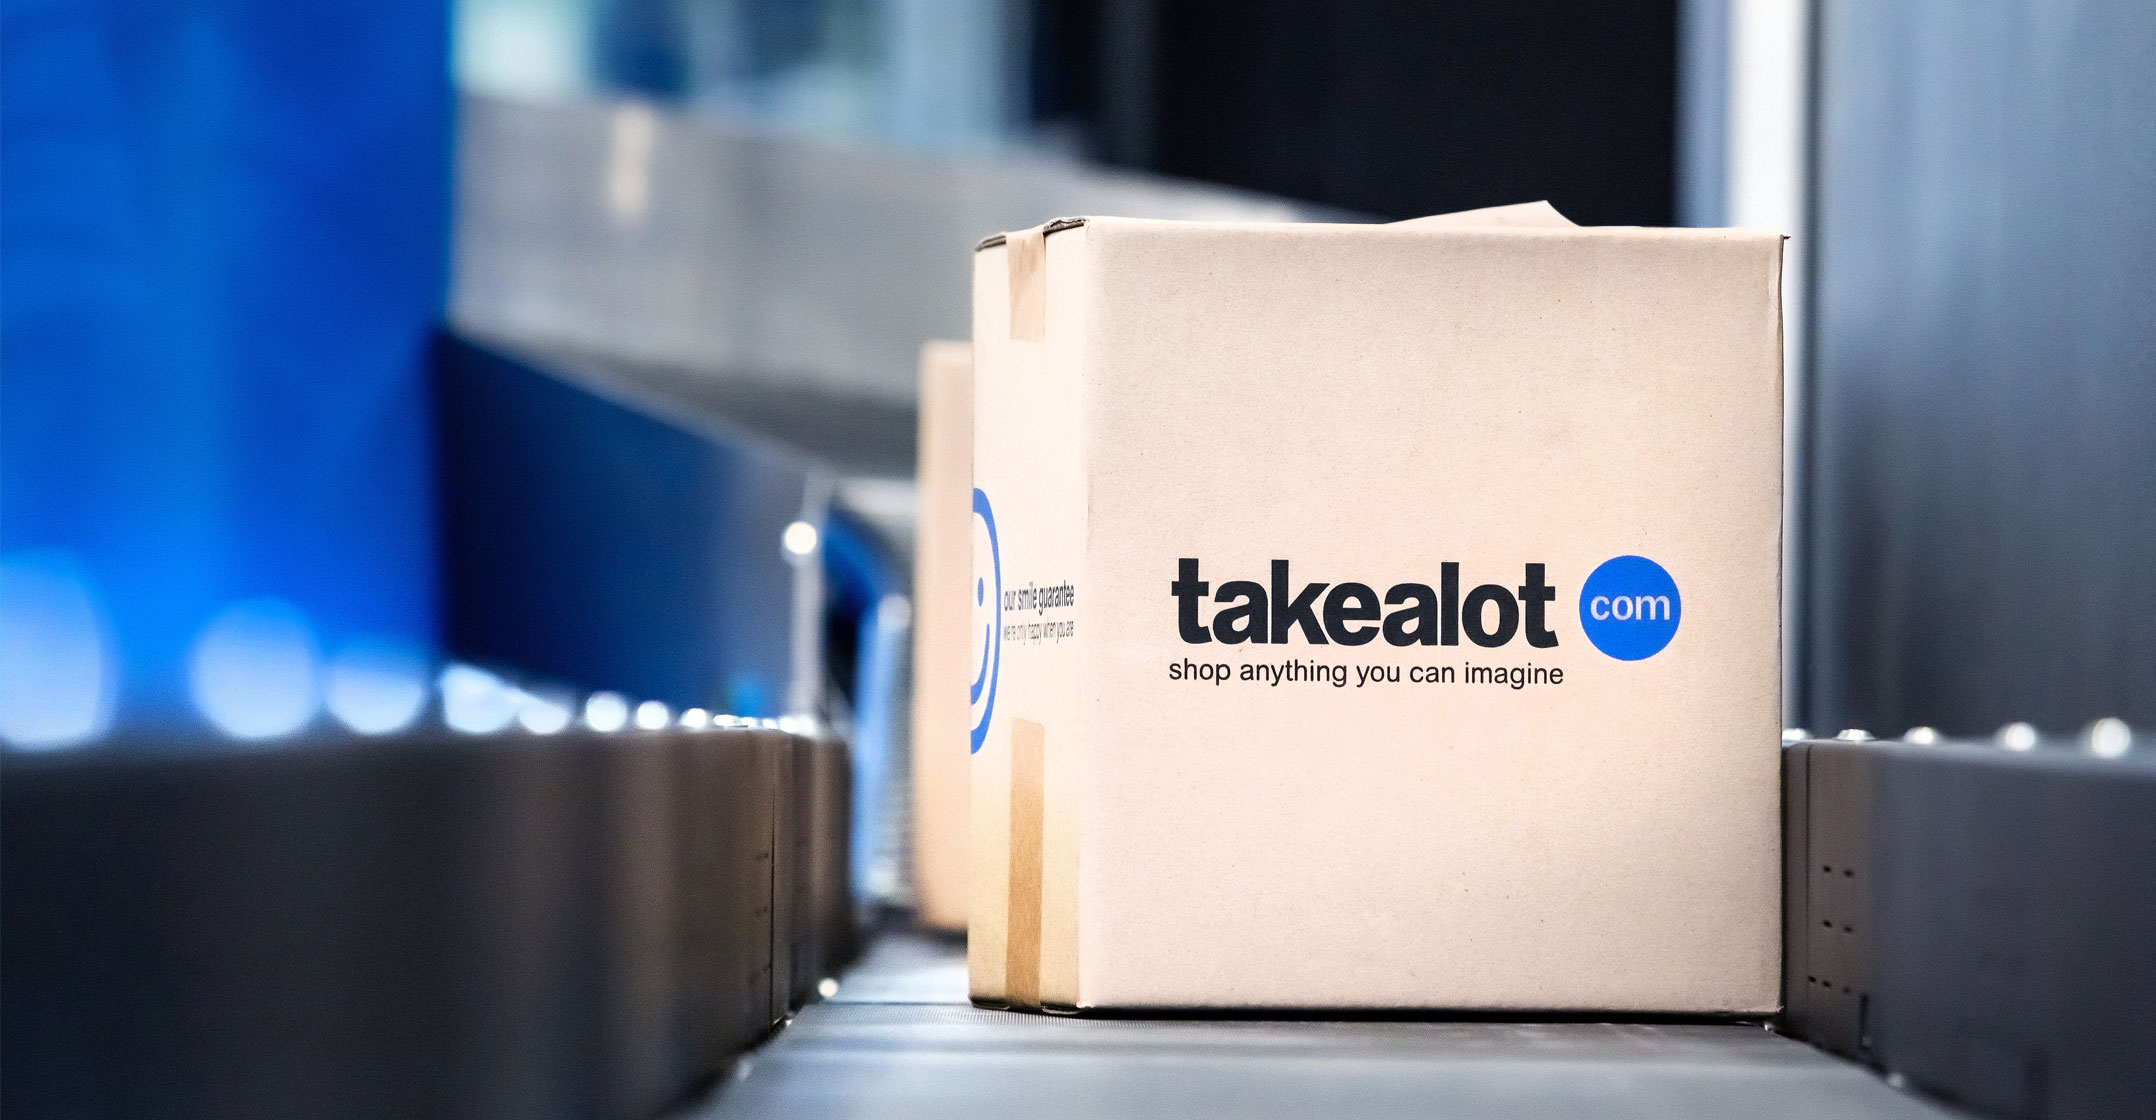 Takealot hopes to keep operating during lockdown - TechCentral